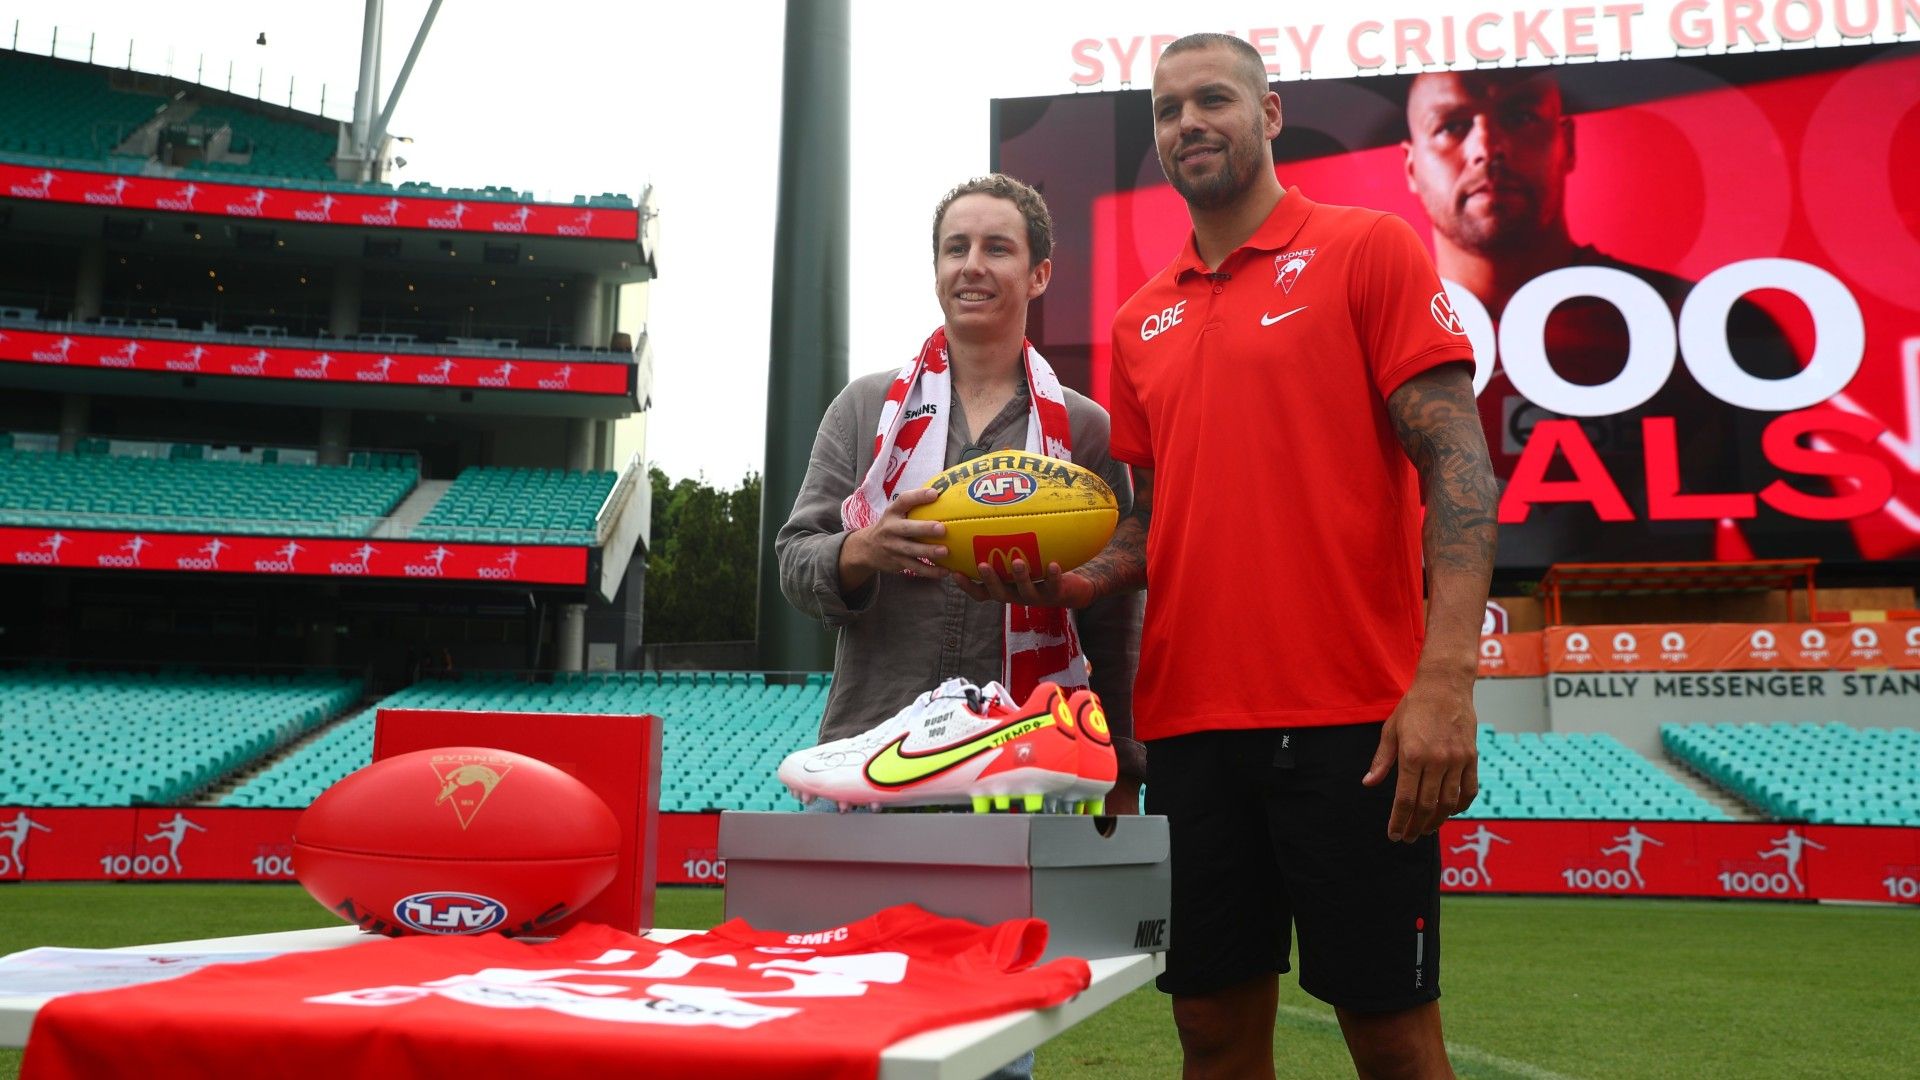 No safety concerns after SCG rush, says Lance 'Buddy' Franklin